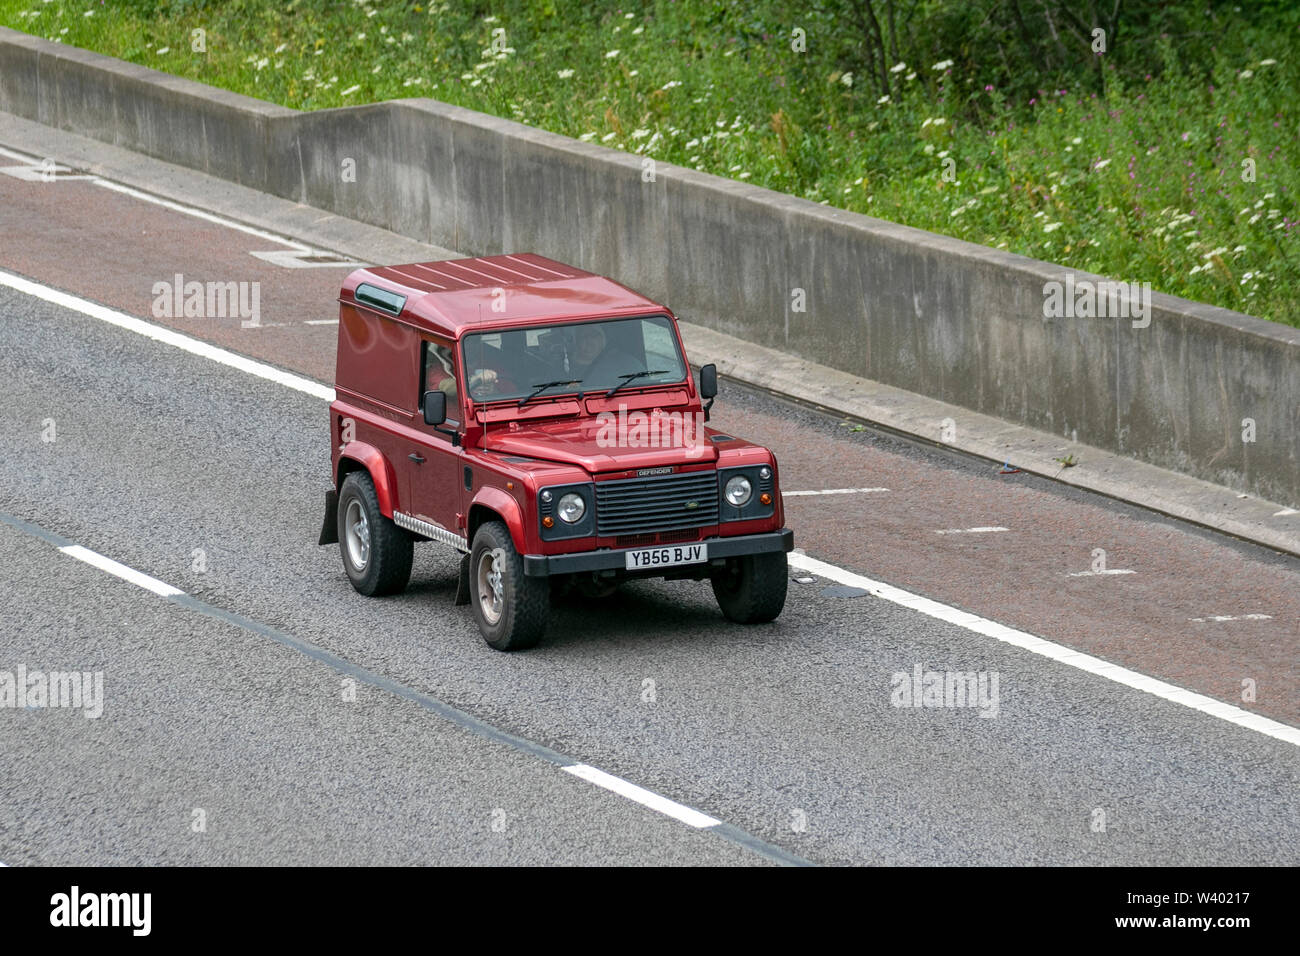 2007 red Land Rover Defender 90 County TD5; UK Vehicular traffic, transport, modern, saloon cars, south-bound on the 3 lane M6 motorway highway. Stock Photo